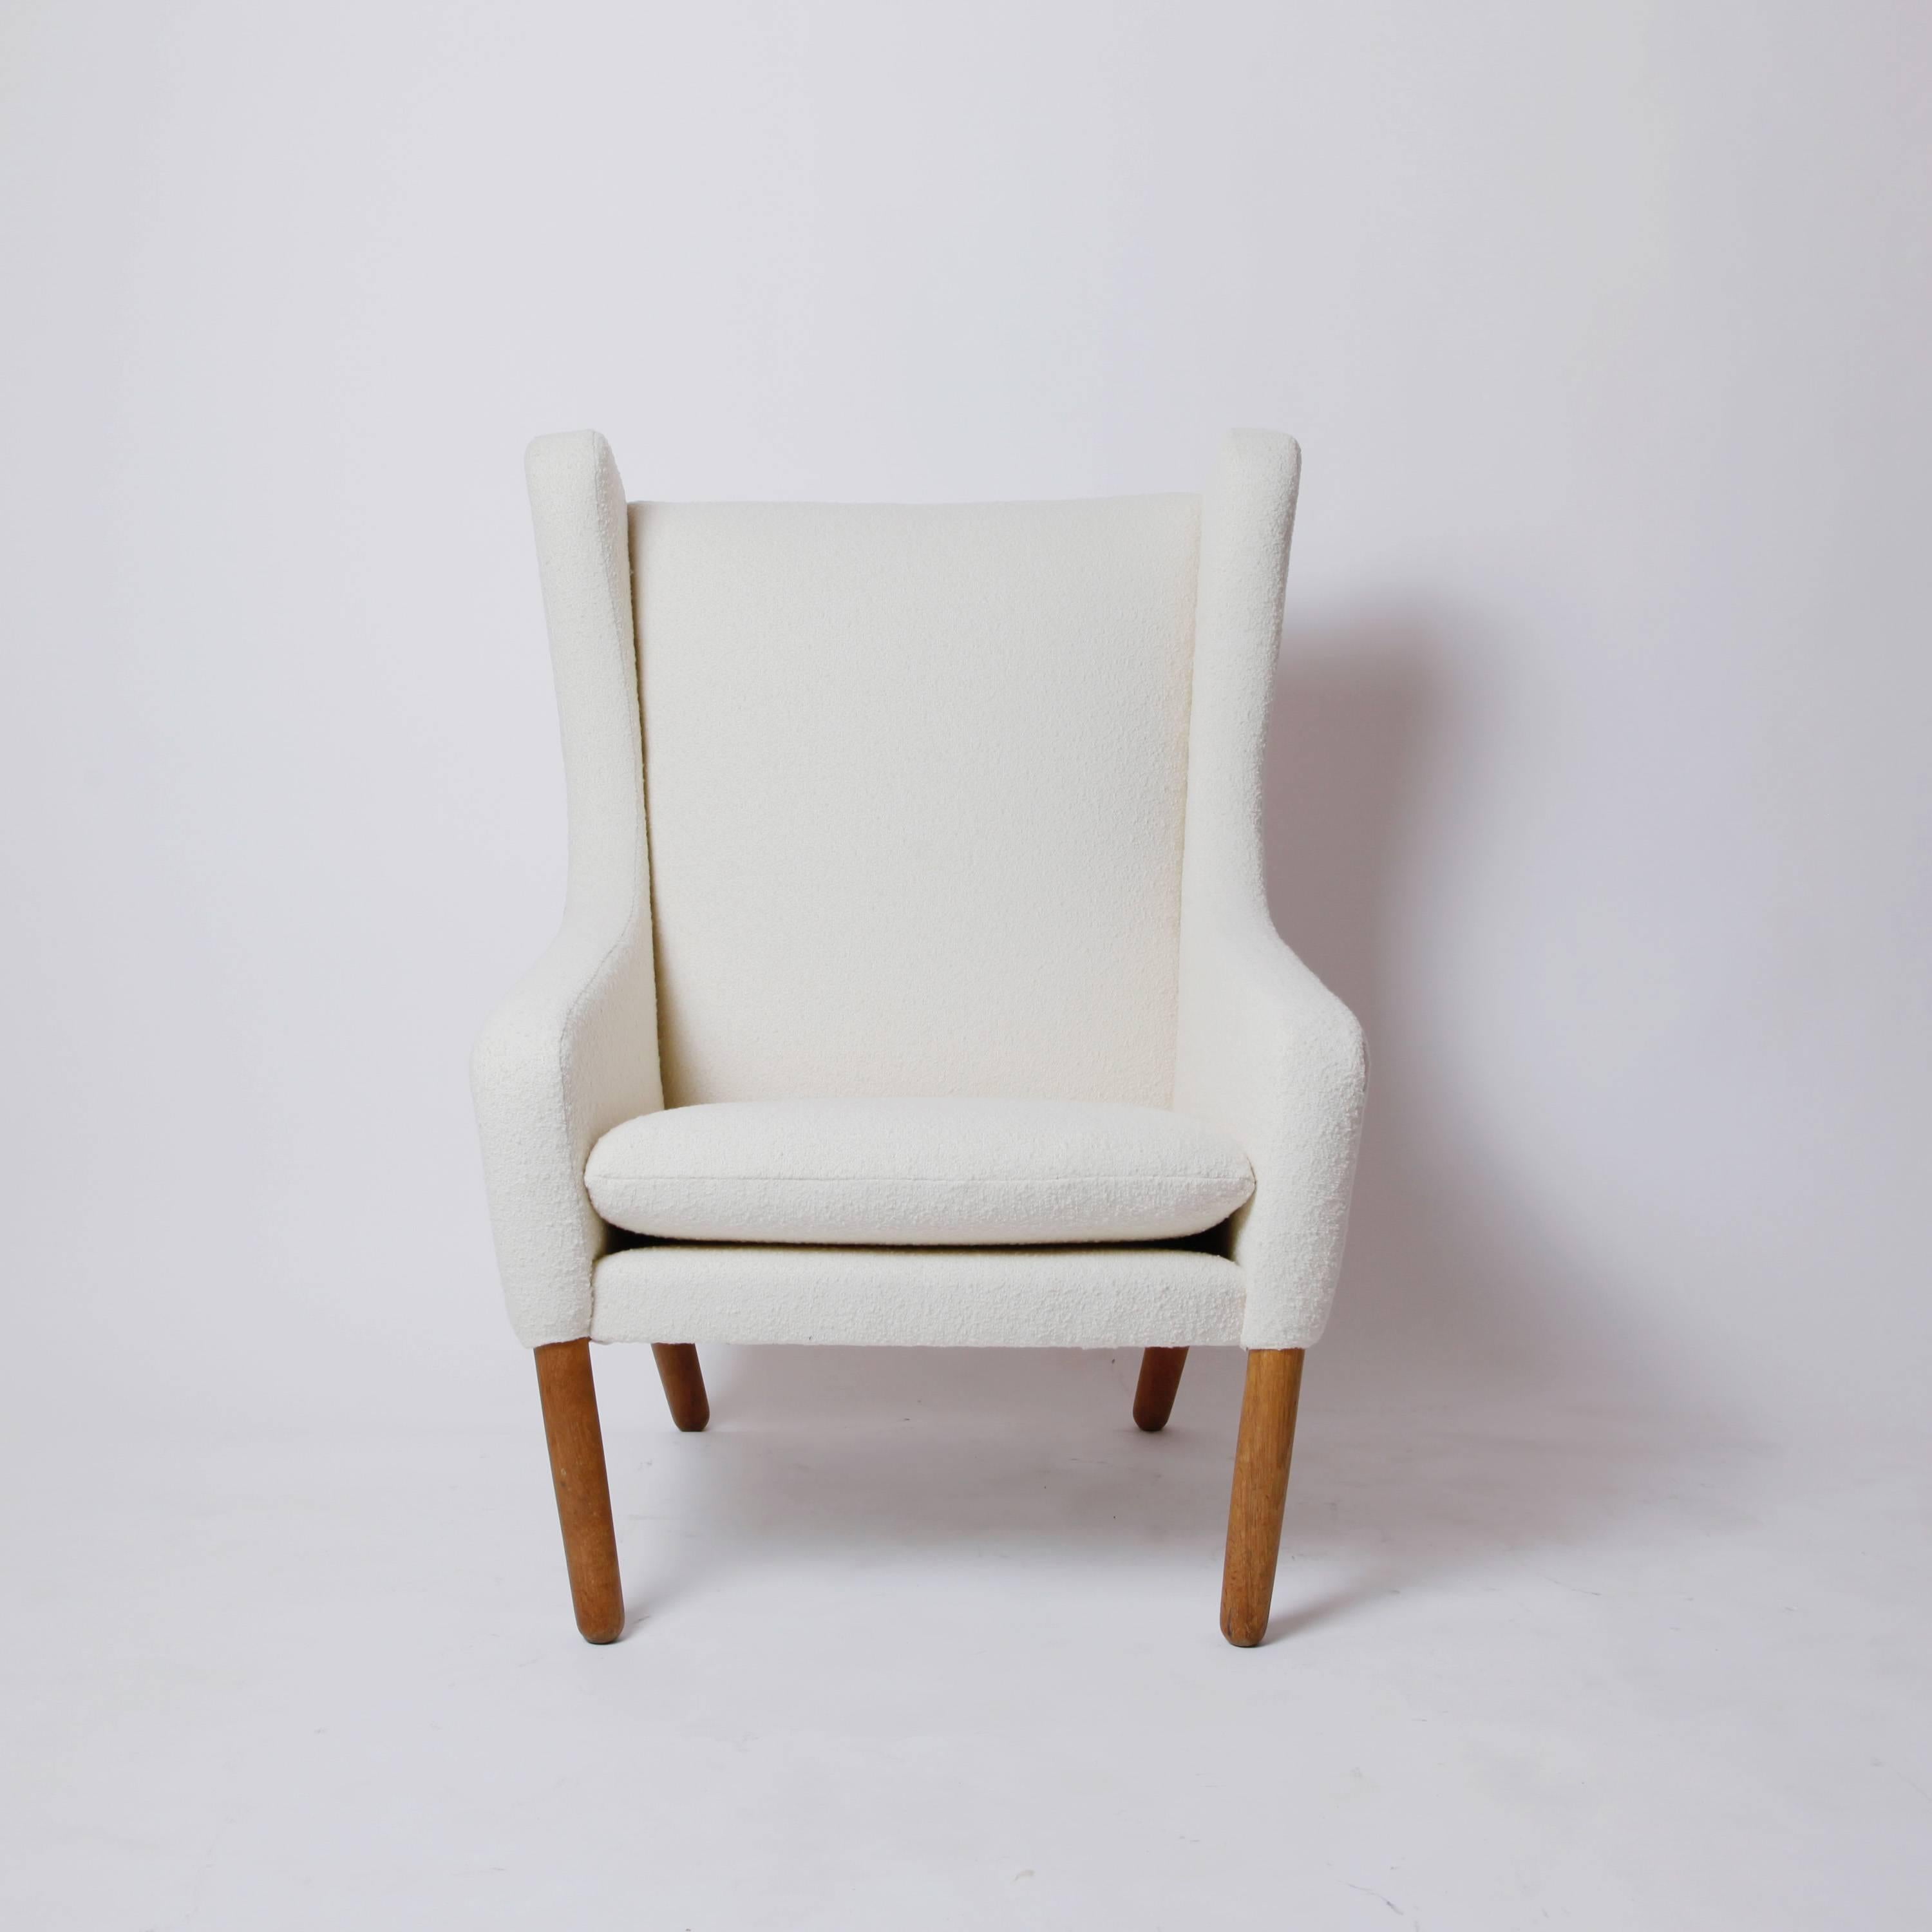 Scandinavian Modern Wingback Chair by Poul Volther